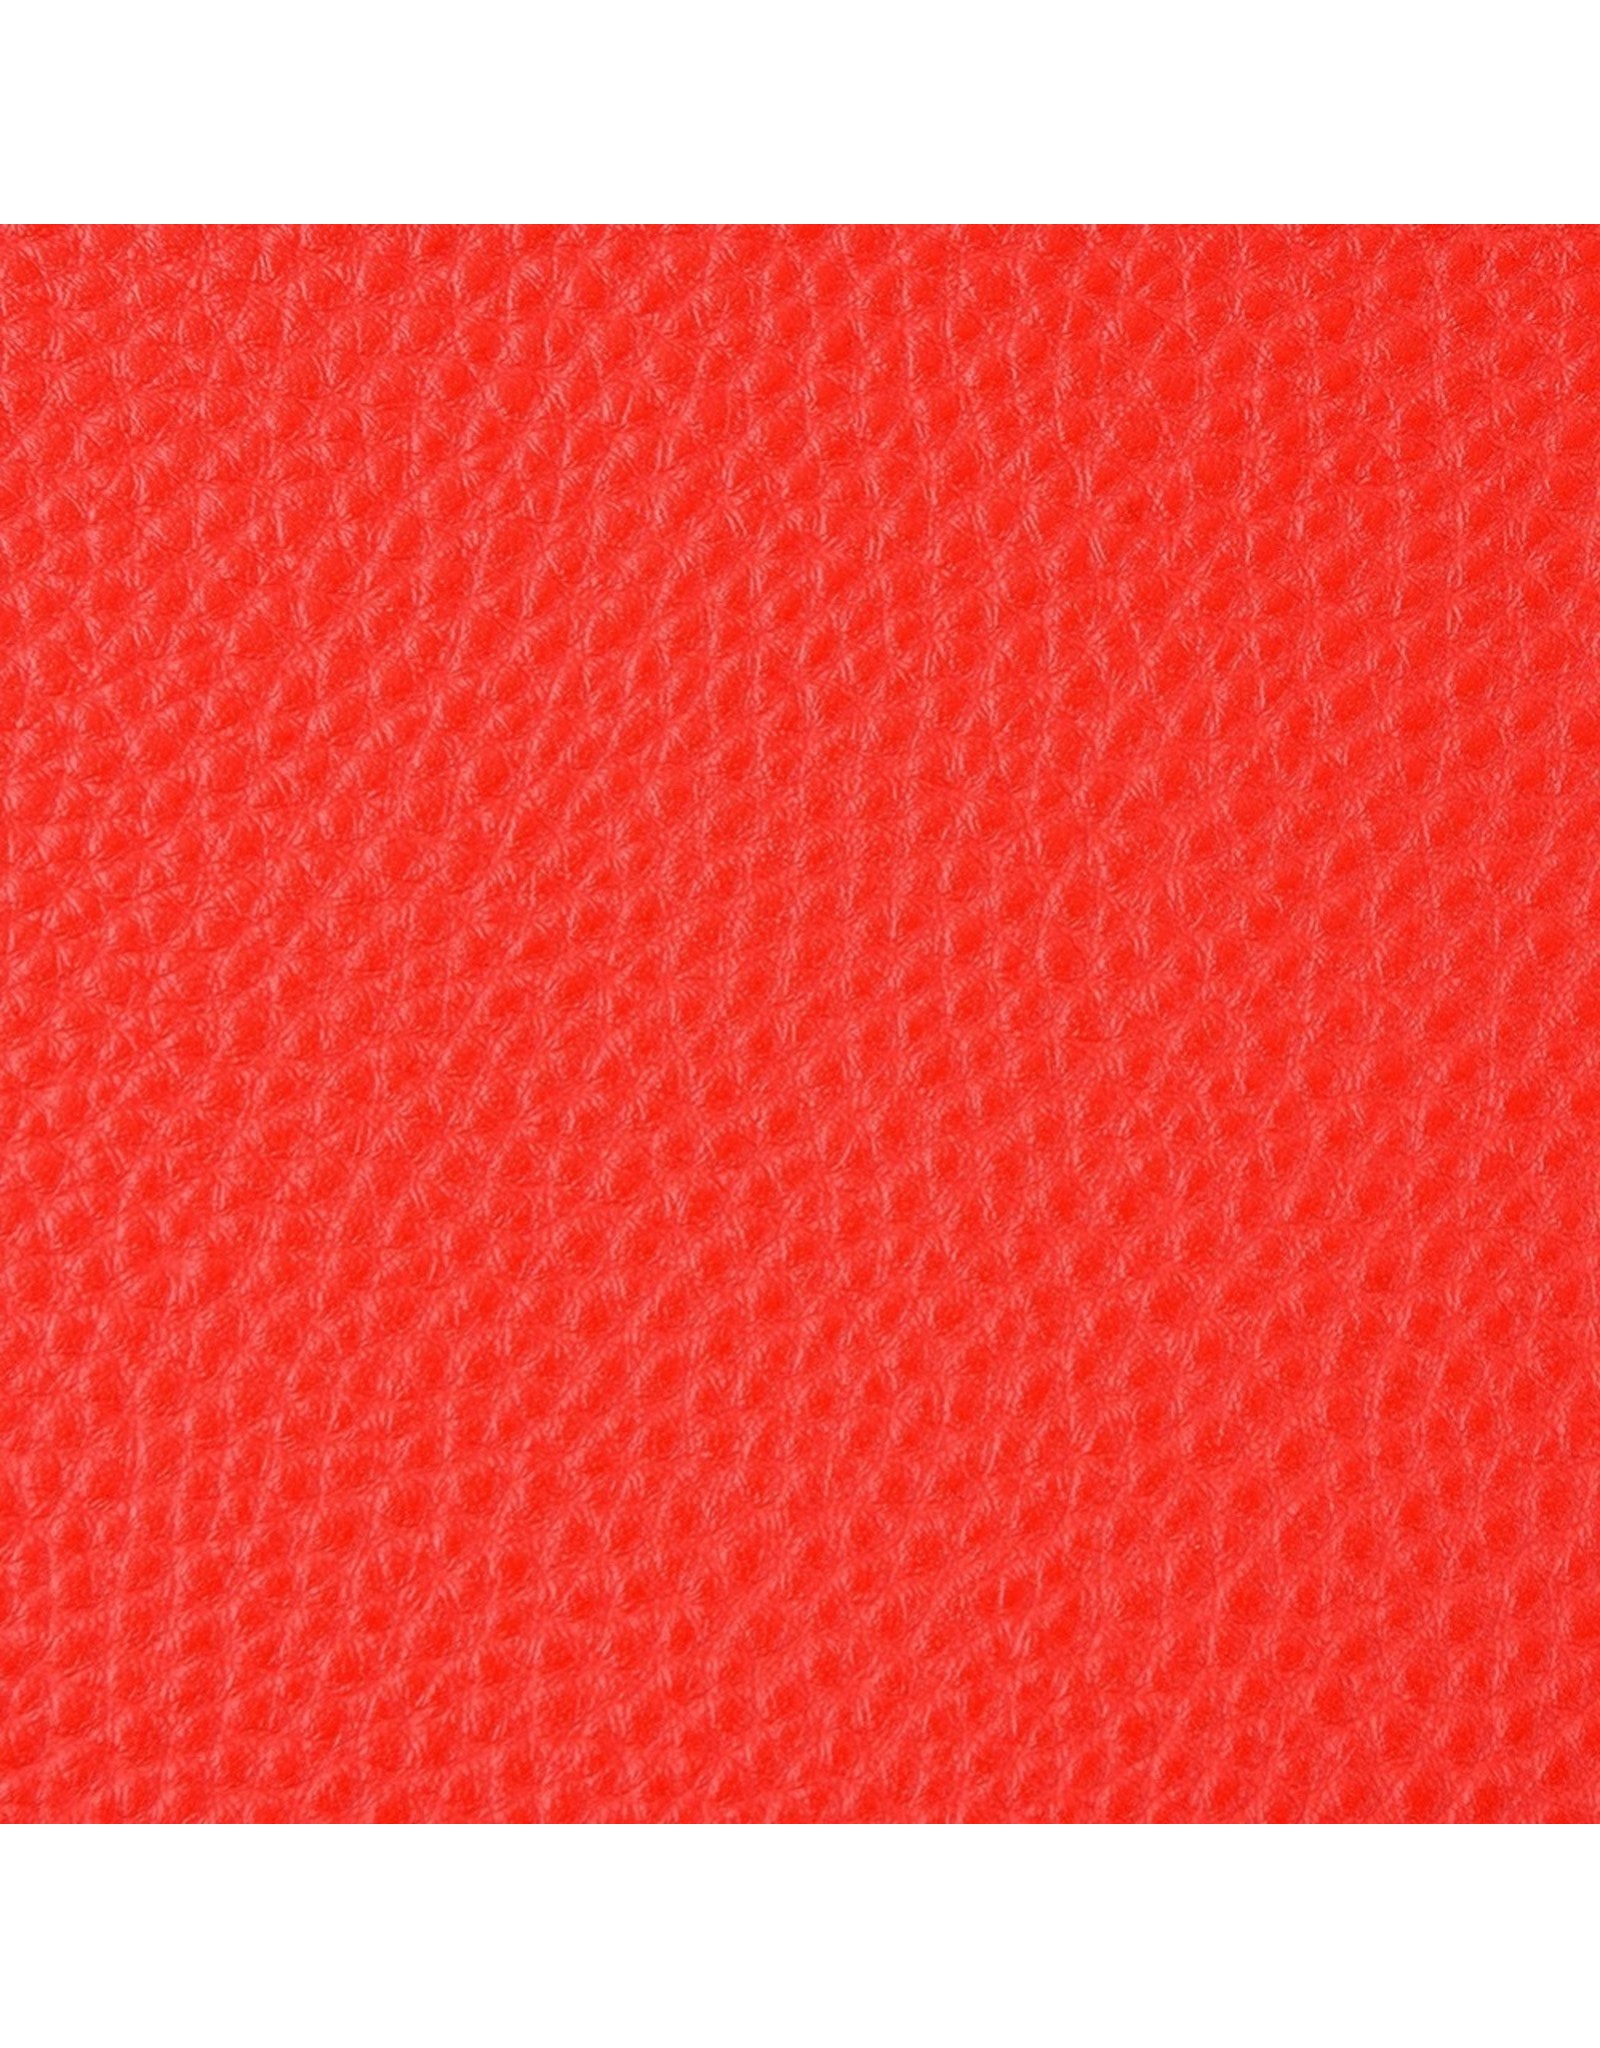 Faux Leather Beading Backing Orange  .5mm thick 8x12”acking Red .5mm thick 8x12"